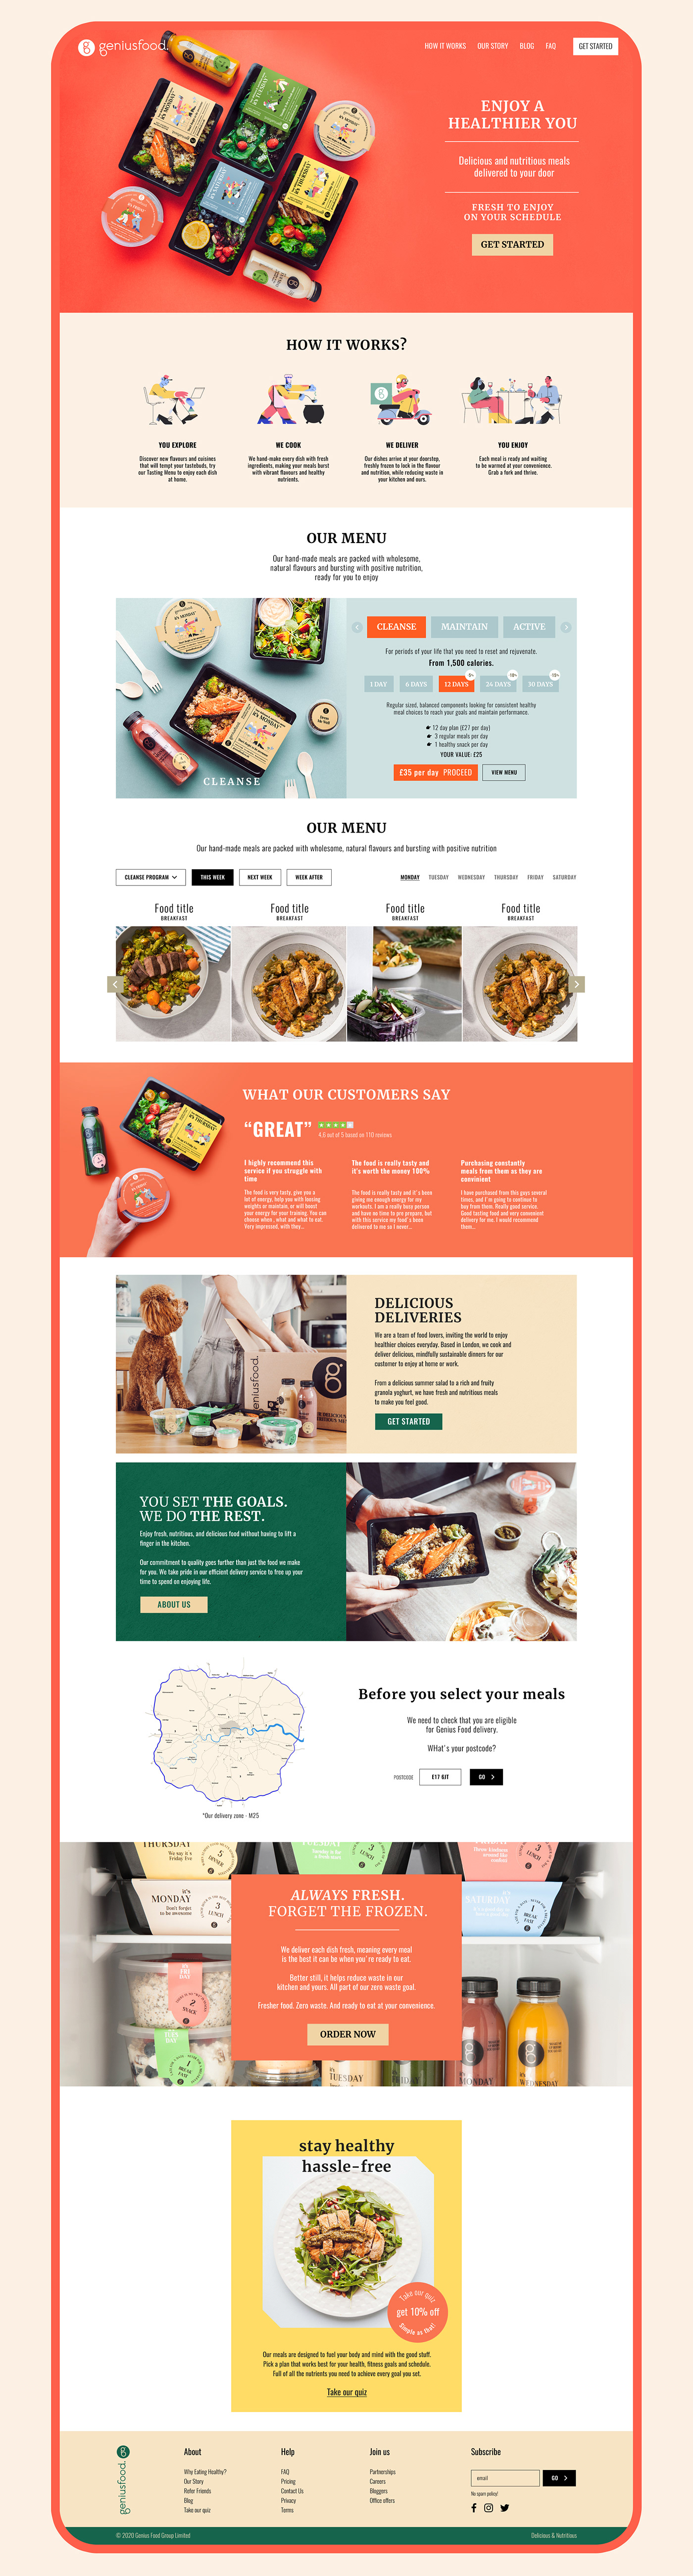 delivery food content food delivery London subscription plan UK